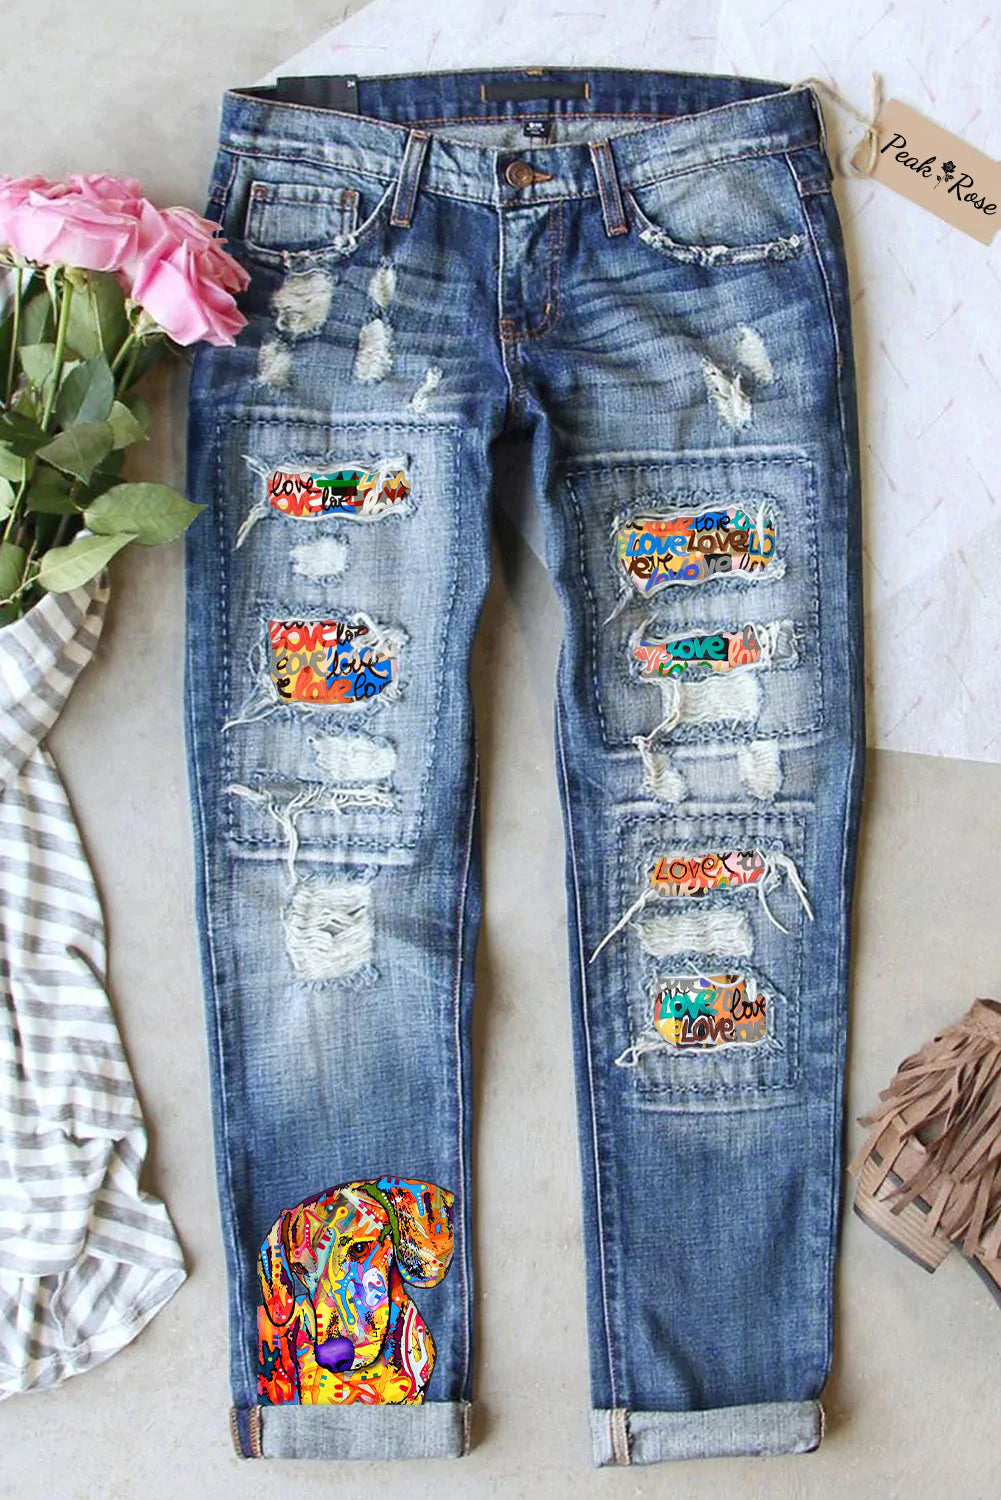 Beloved Dog Vintage Oil Painting Abstract Cute Style Ripped Denim Jeans